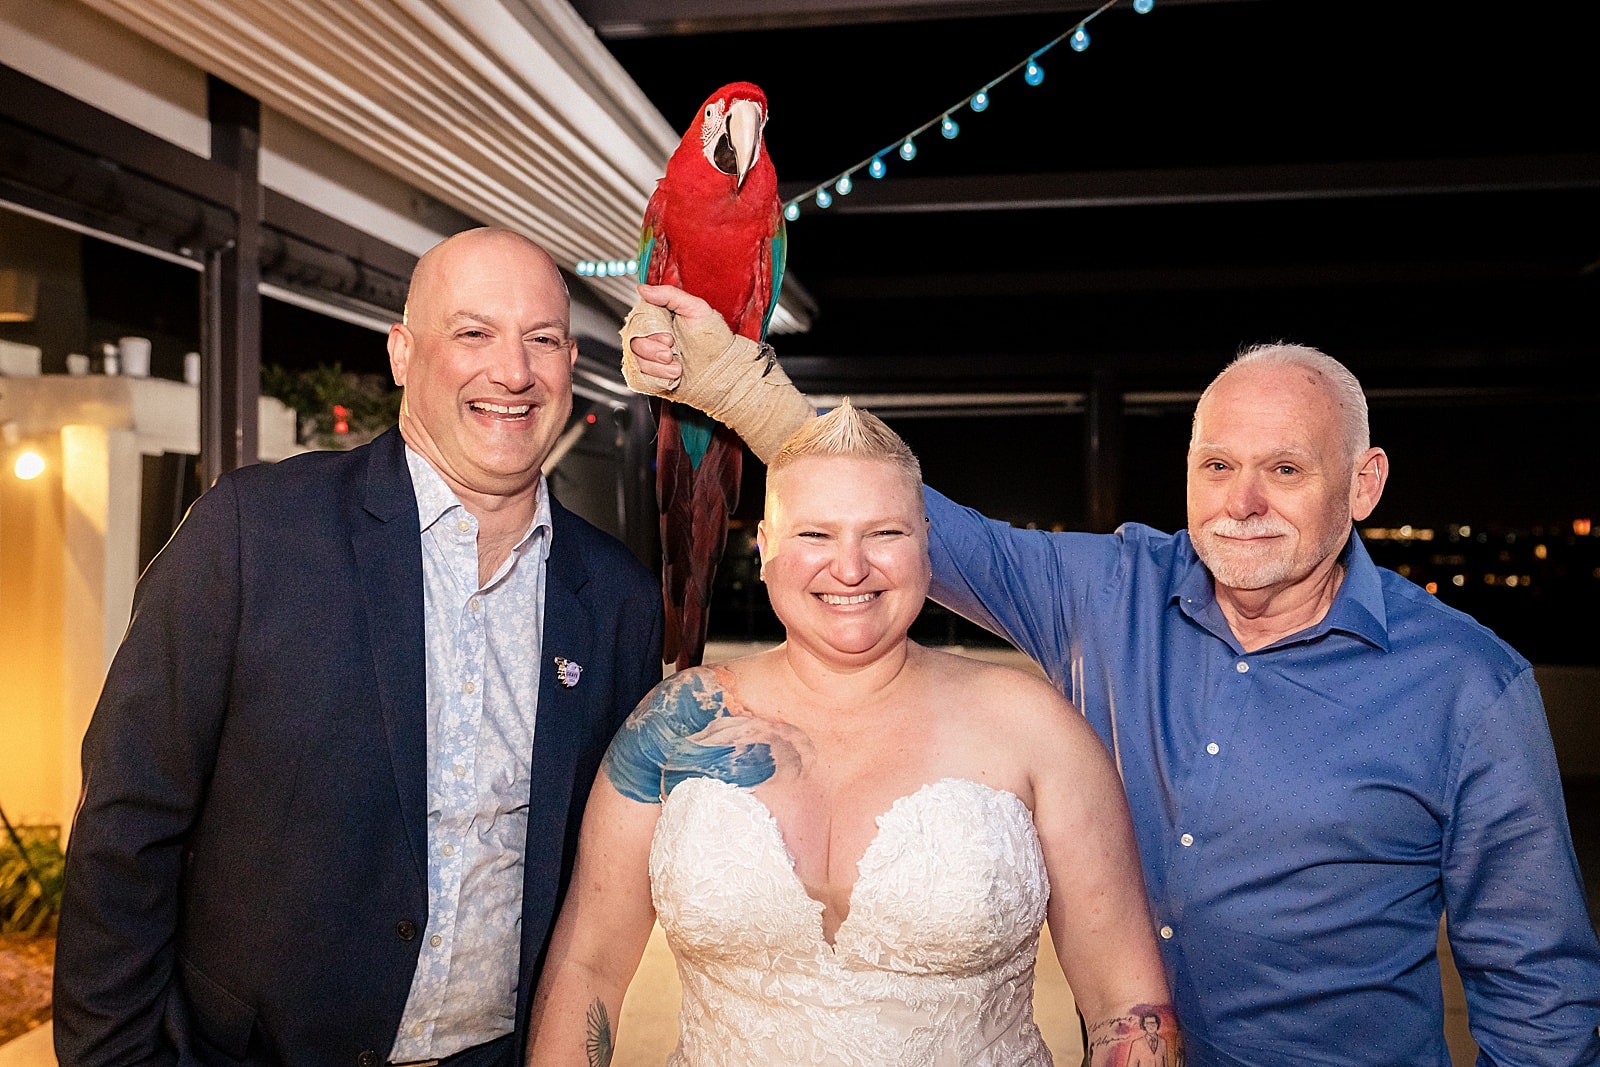 Merlot the parrot is an ambassador at the Hyatt Regency Grand Cypress in Orlando and he was a surprise guest at this destination wedding